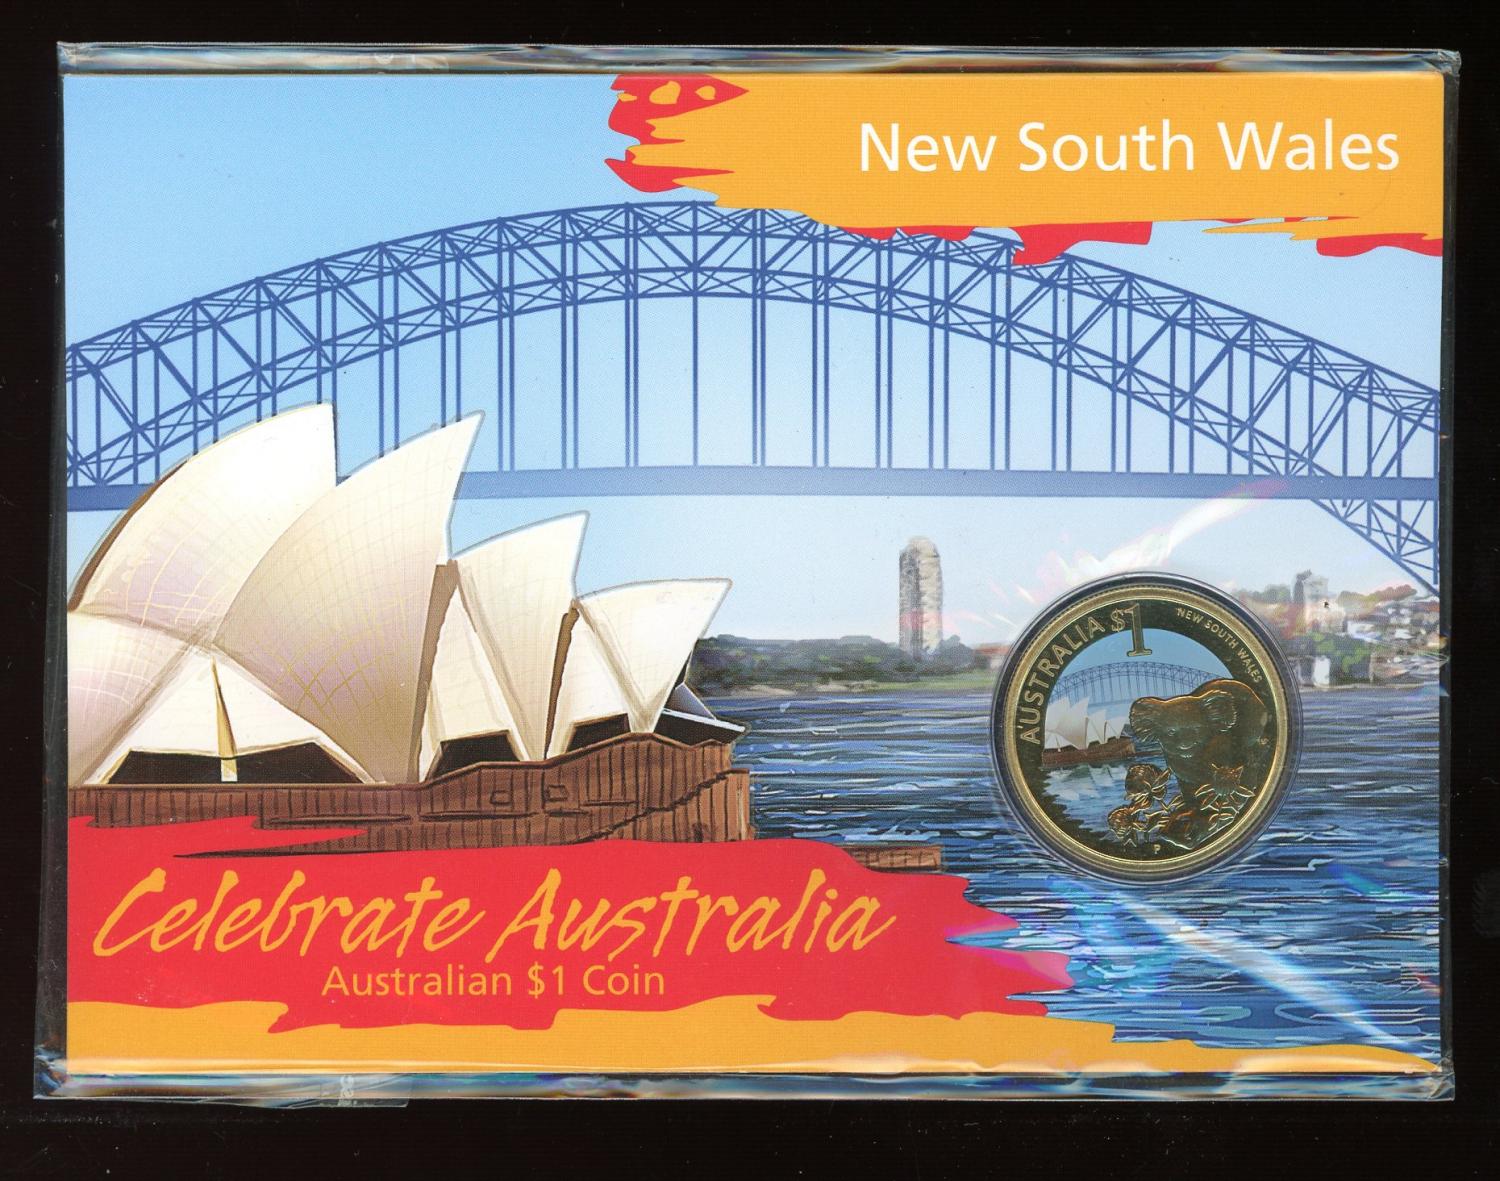 Thumbnail for 2009 Celebrate Australia Coloured Uncirculated $1 Coin - New South Wales